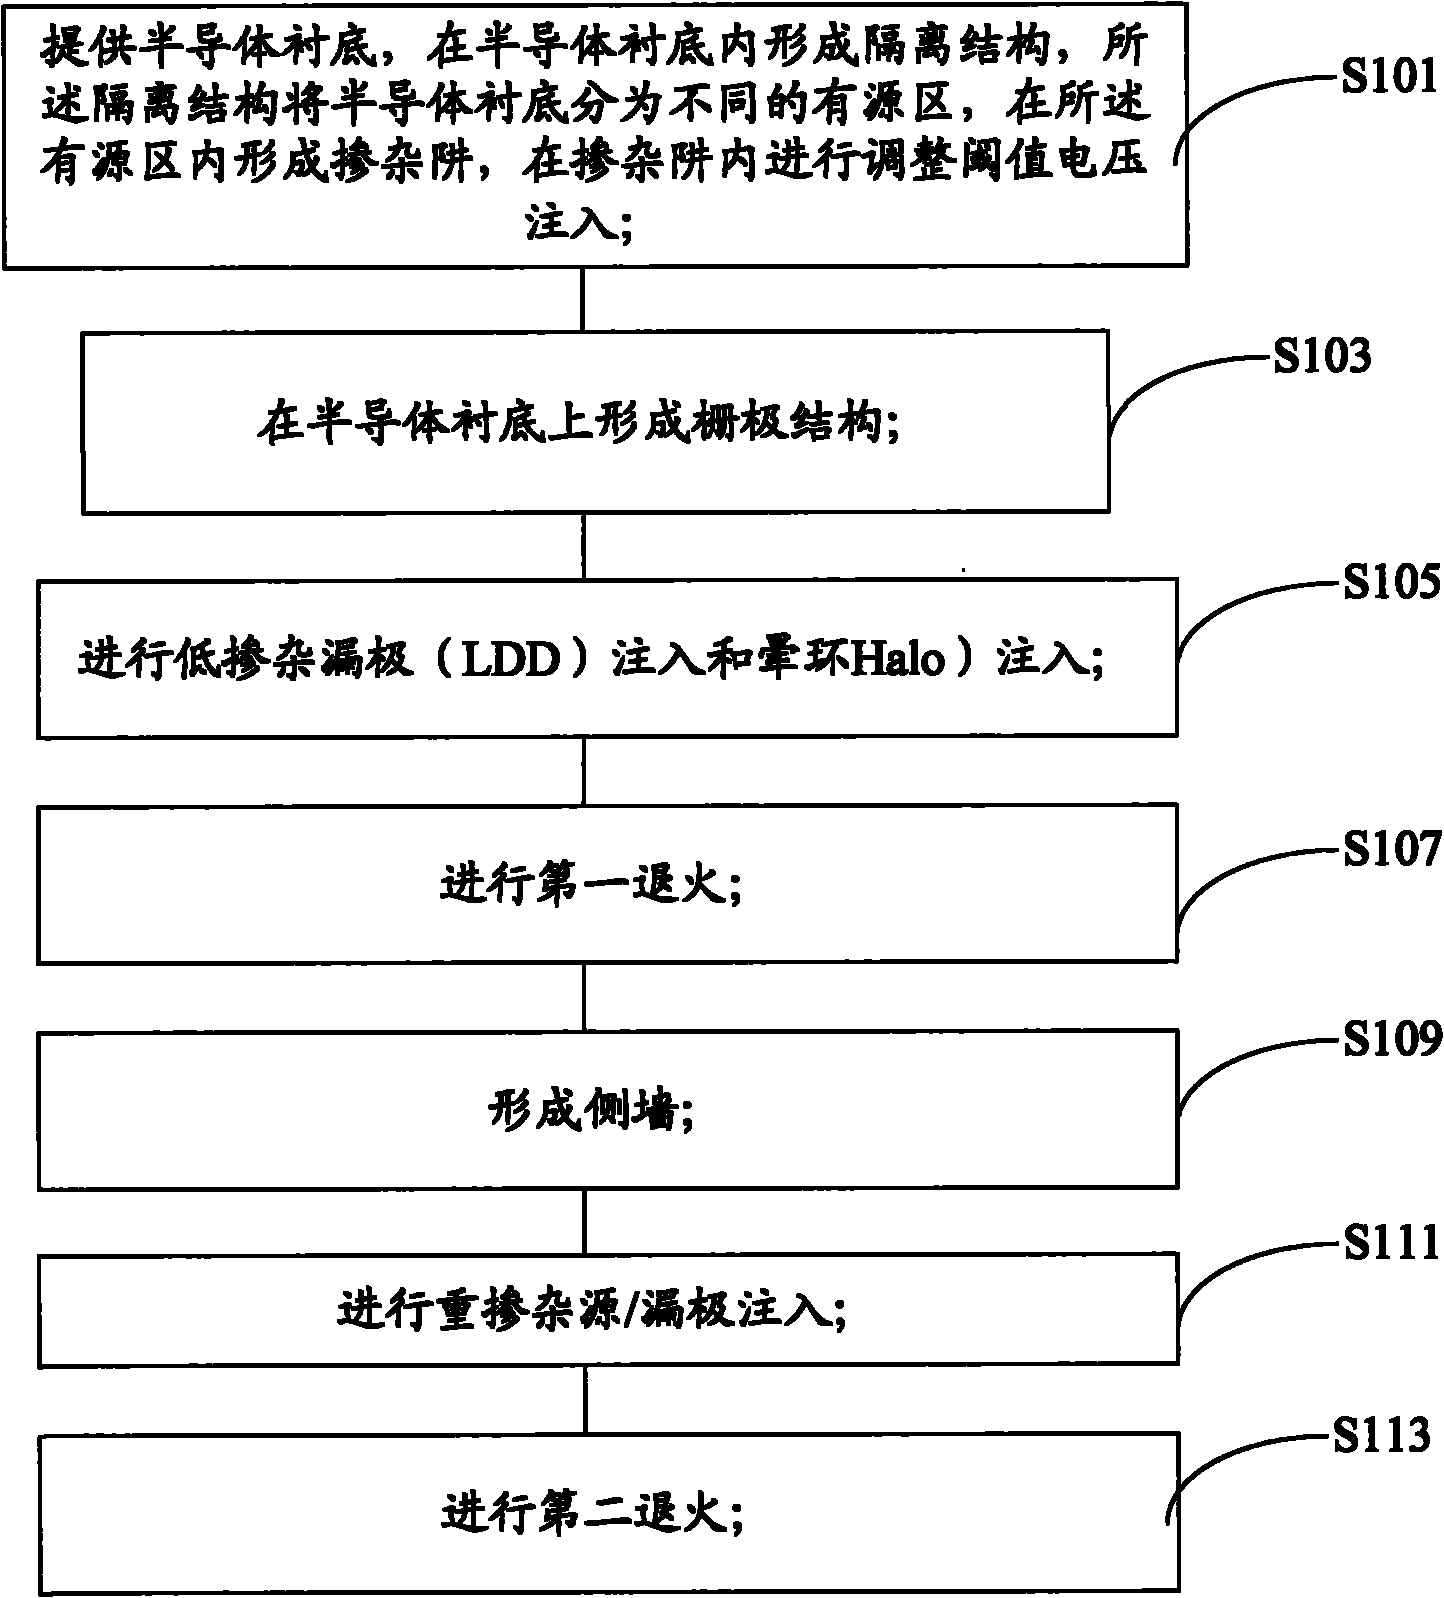 Production method of MOS (Metal Oxide Semiconductor) transistor